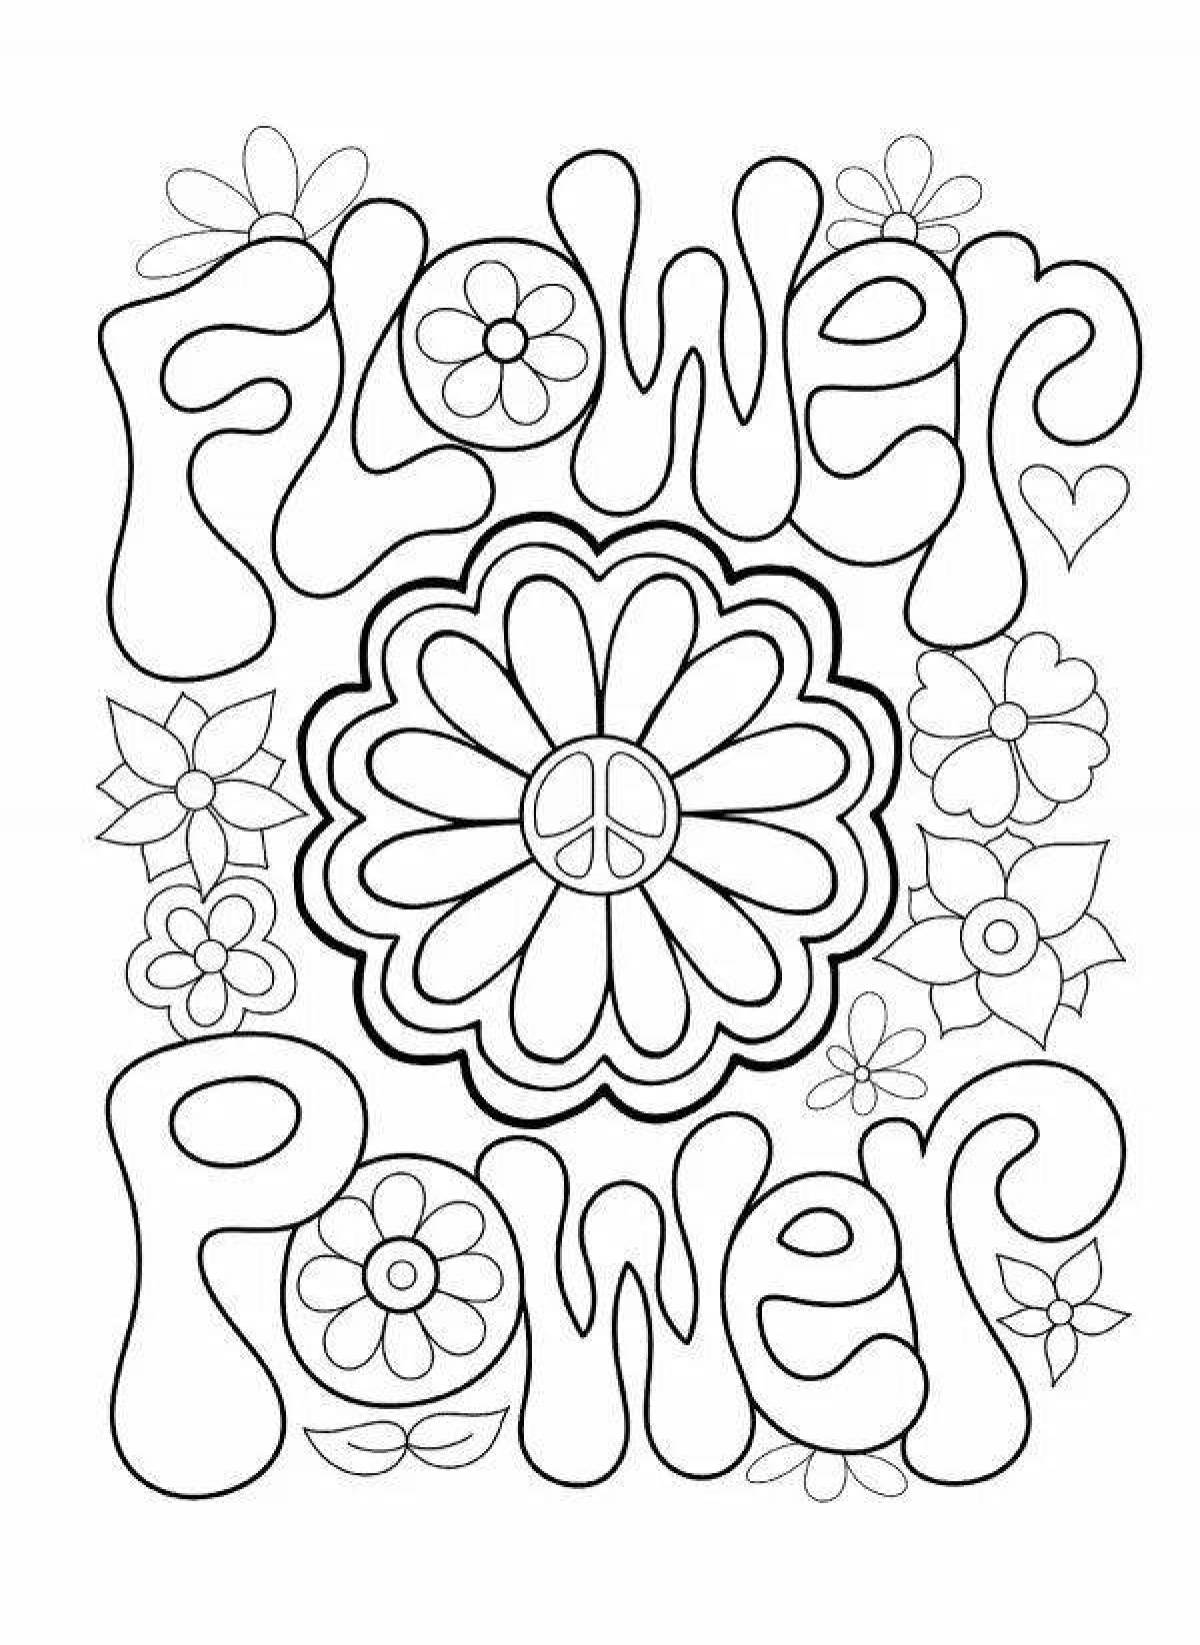 Exciting coloring poster